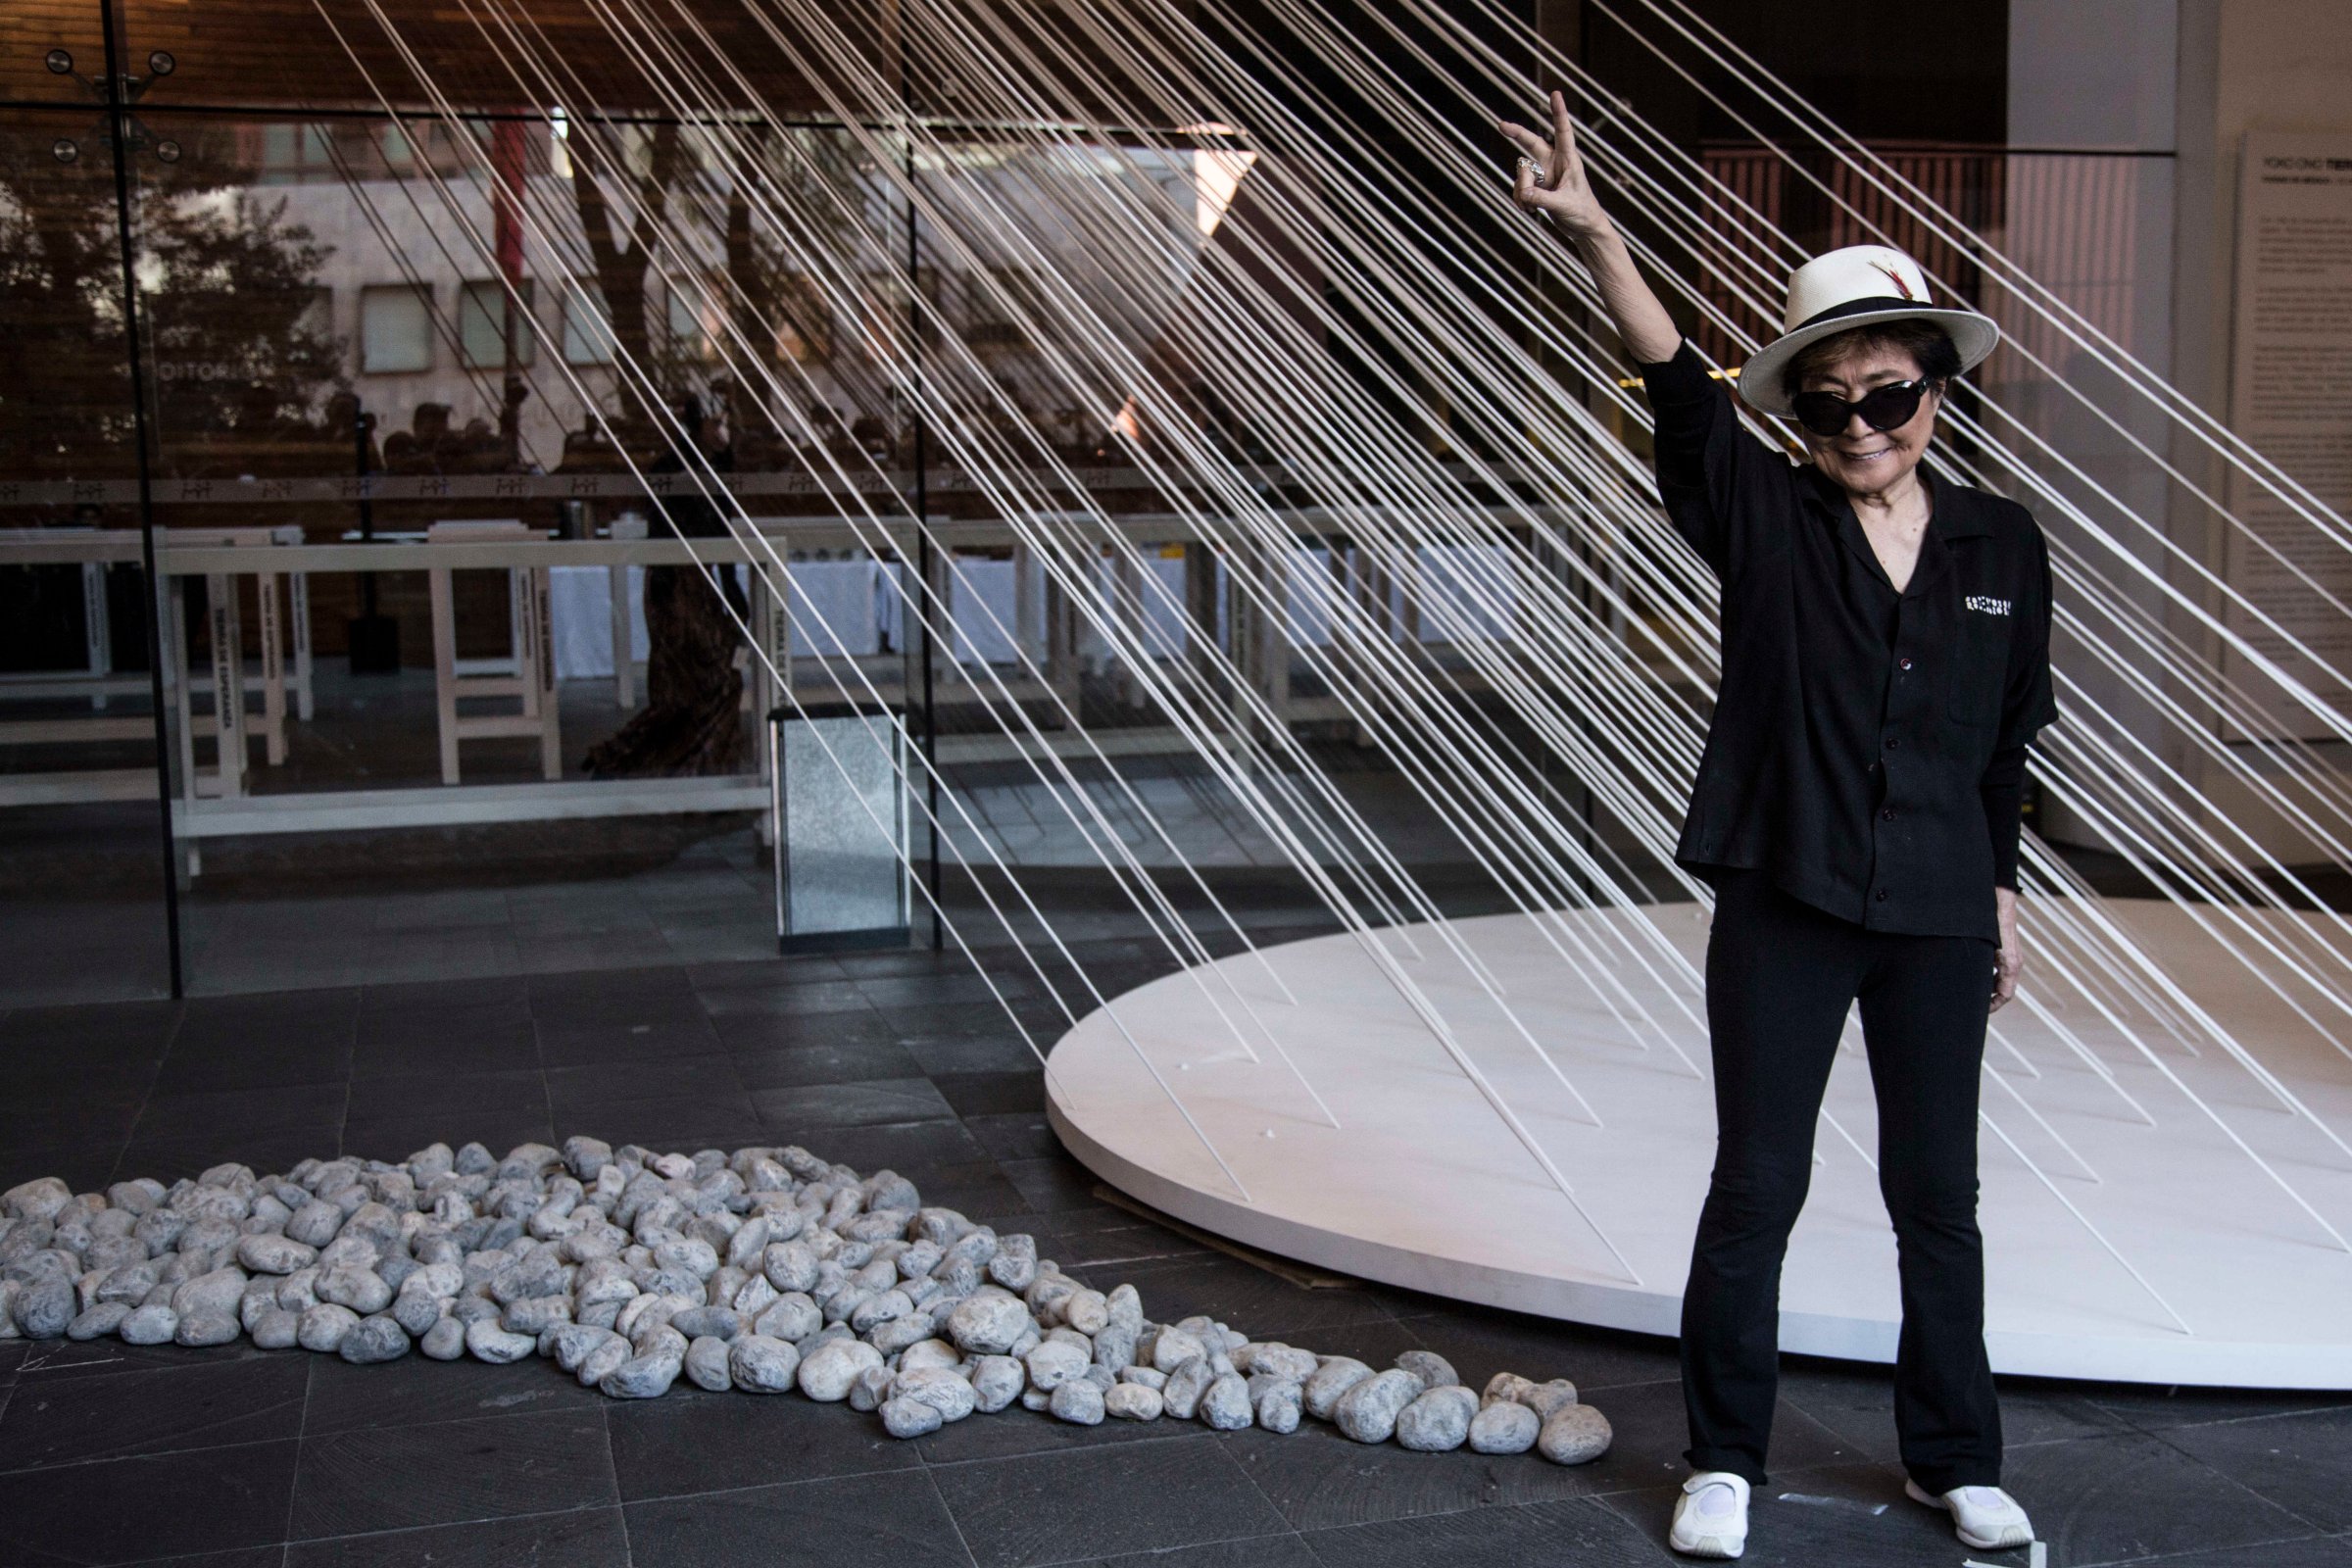 How To Be in Yoko Ono's Next Art Installation